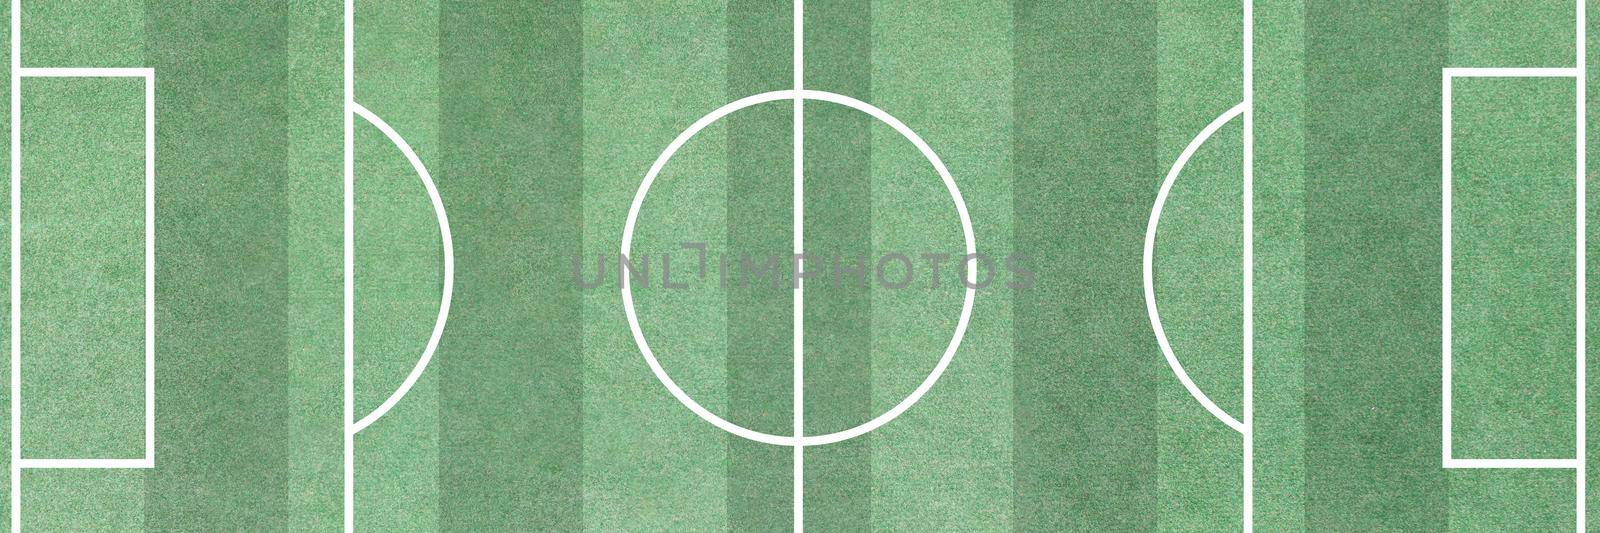 Football field with striped green grass background top view. Professional sport soccer concept